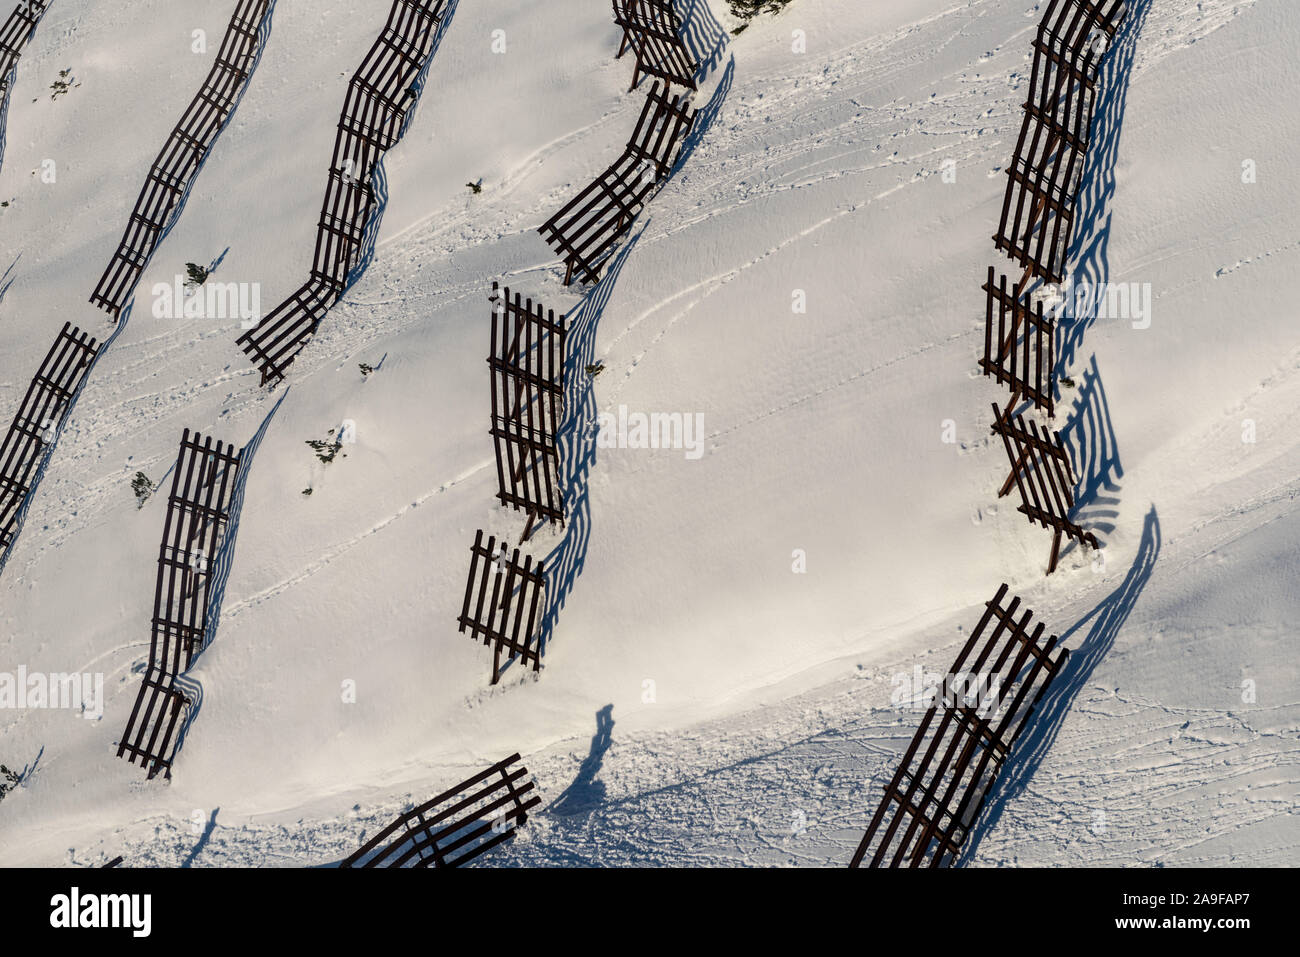 Avalanche barrier, snow Stock Photo